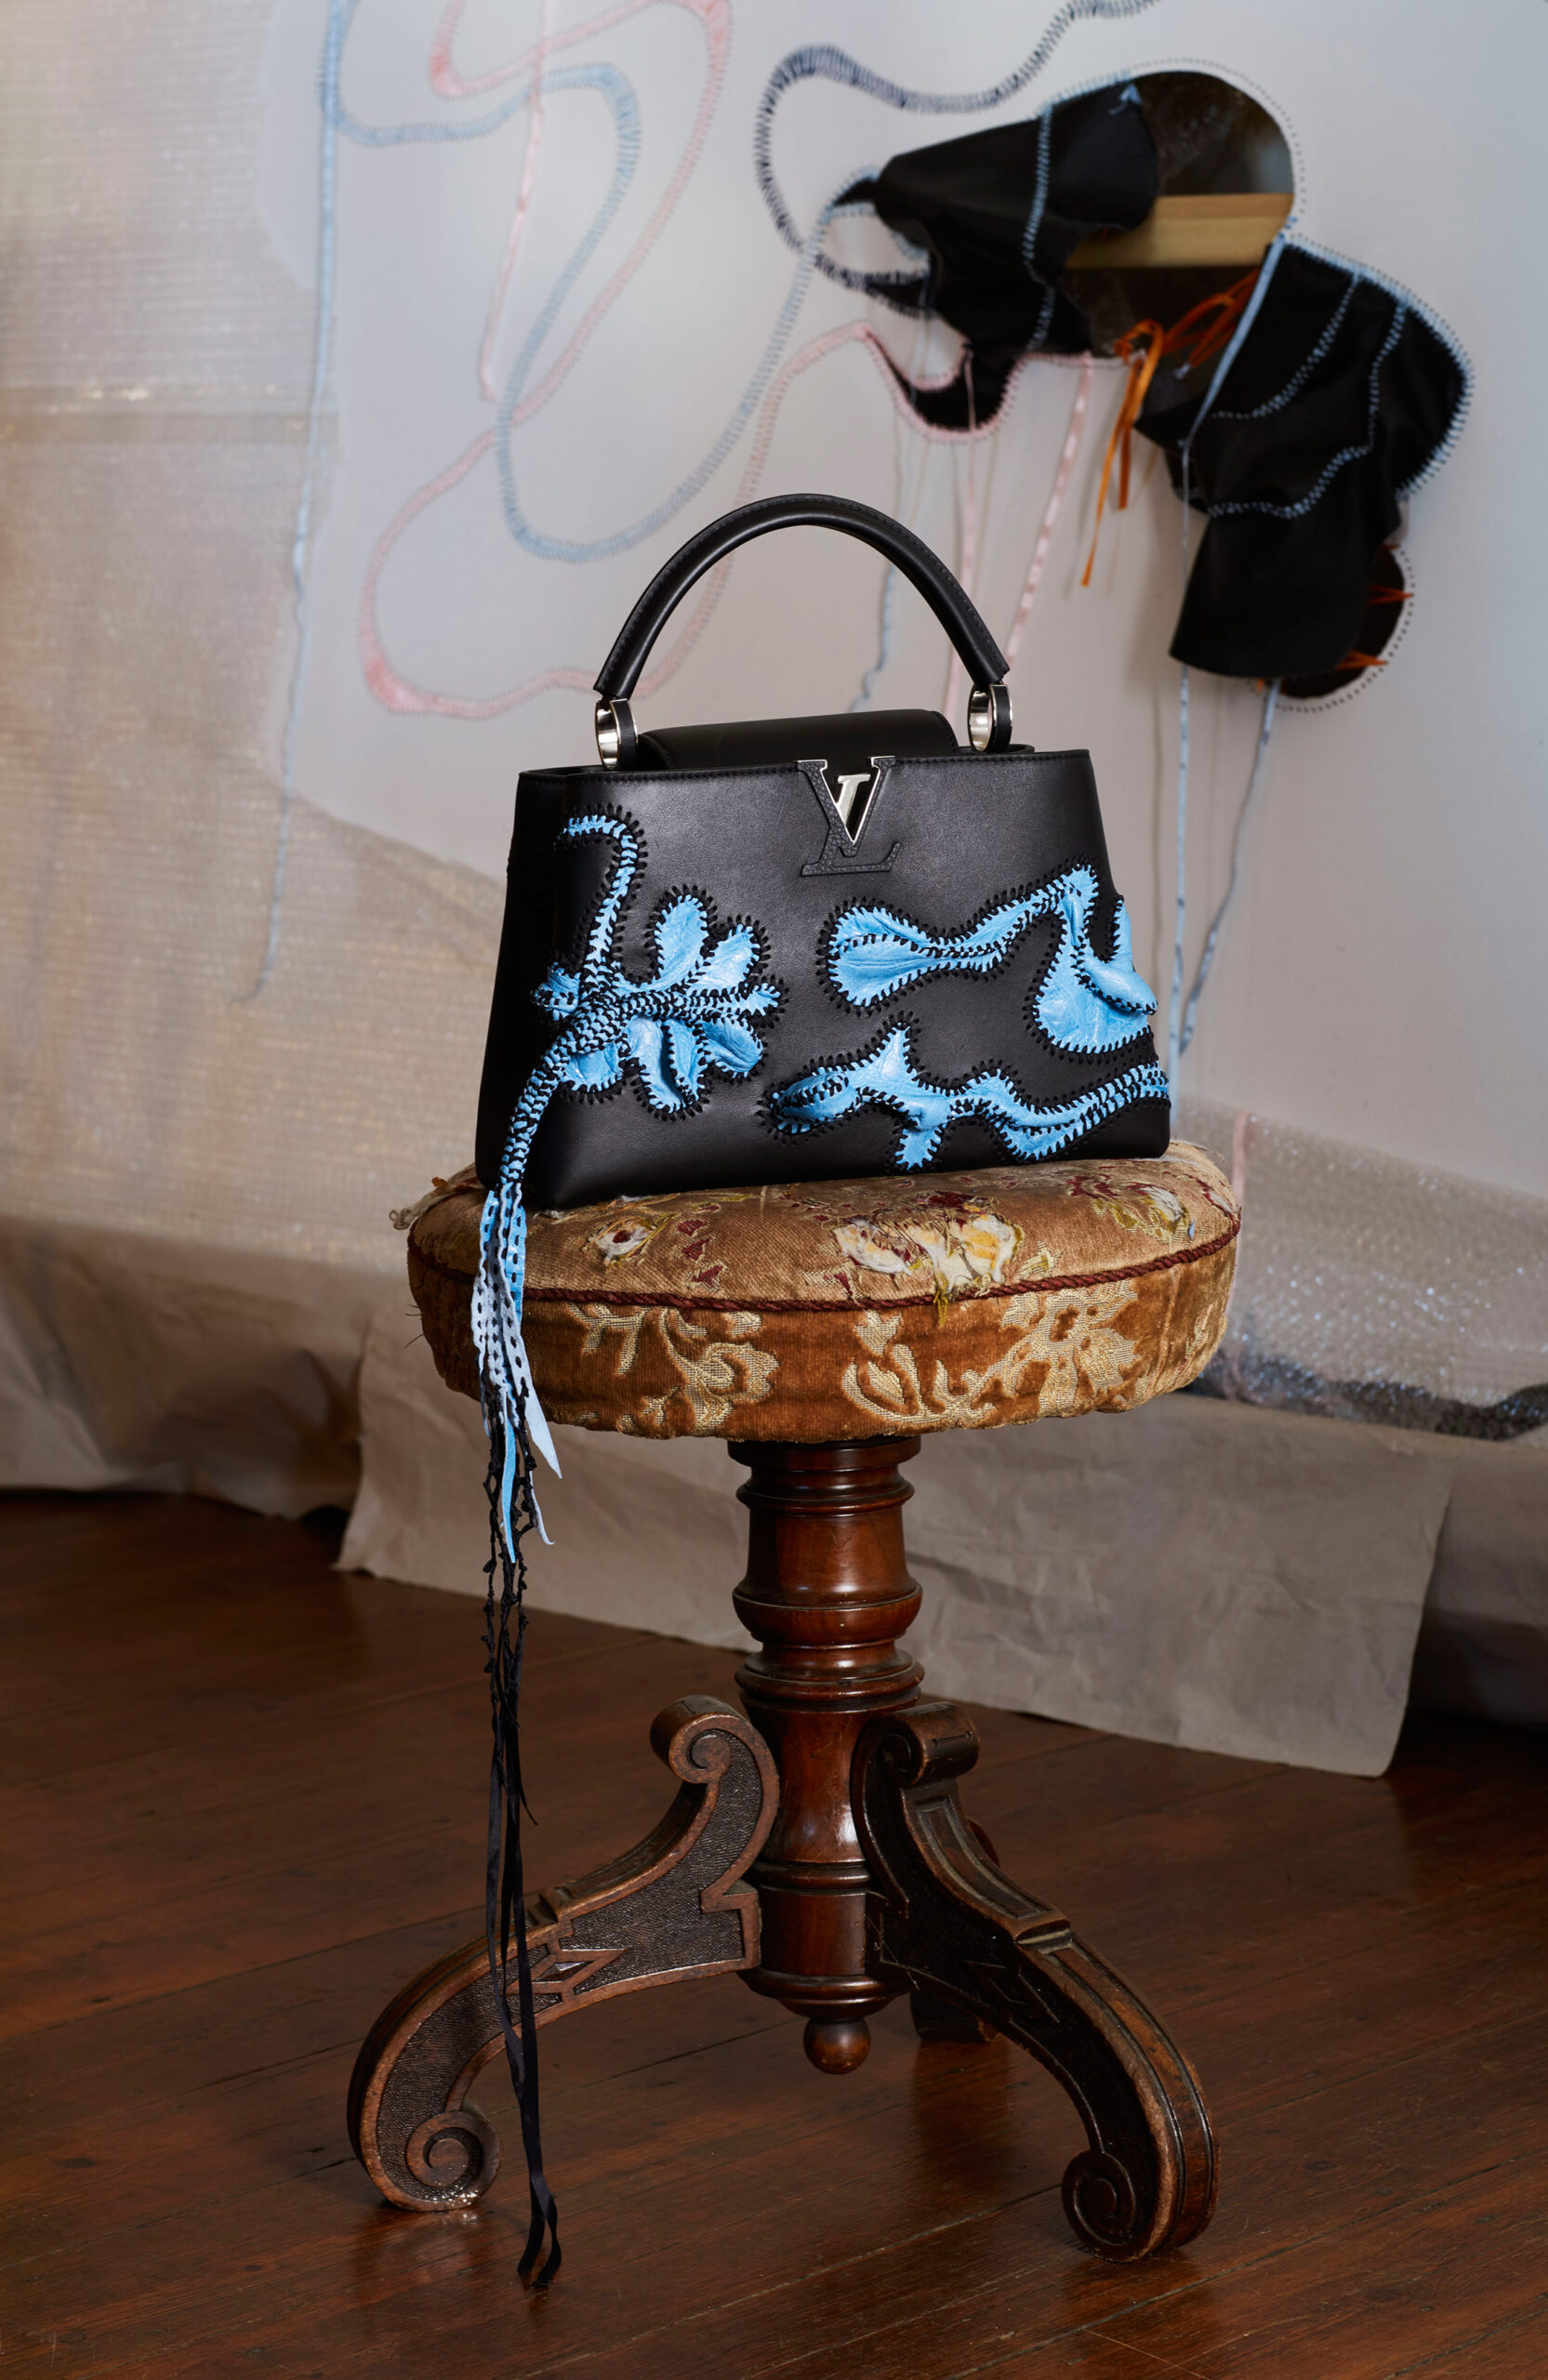 Louis Vuitton Artycapucines Collection invites six artists to